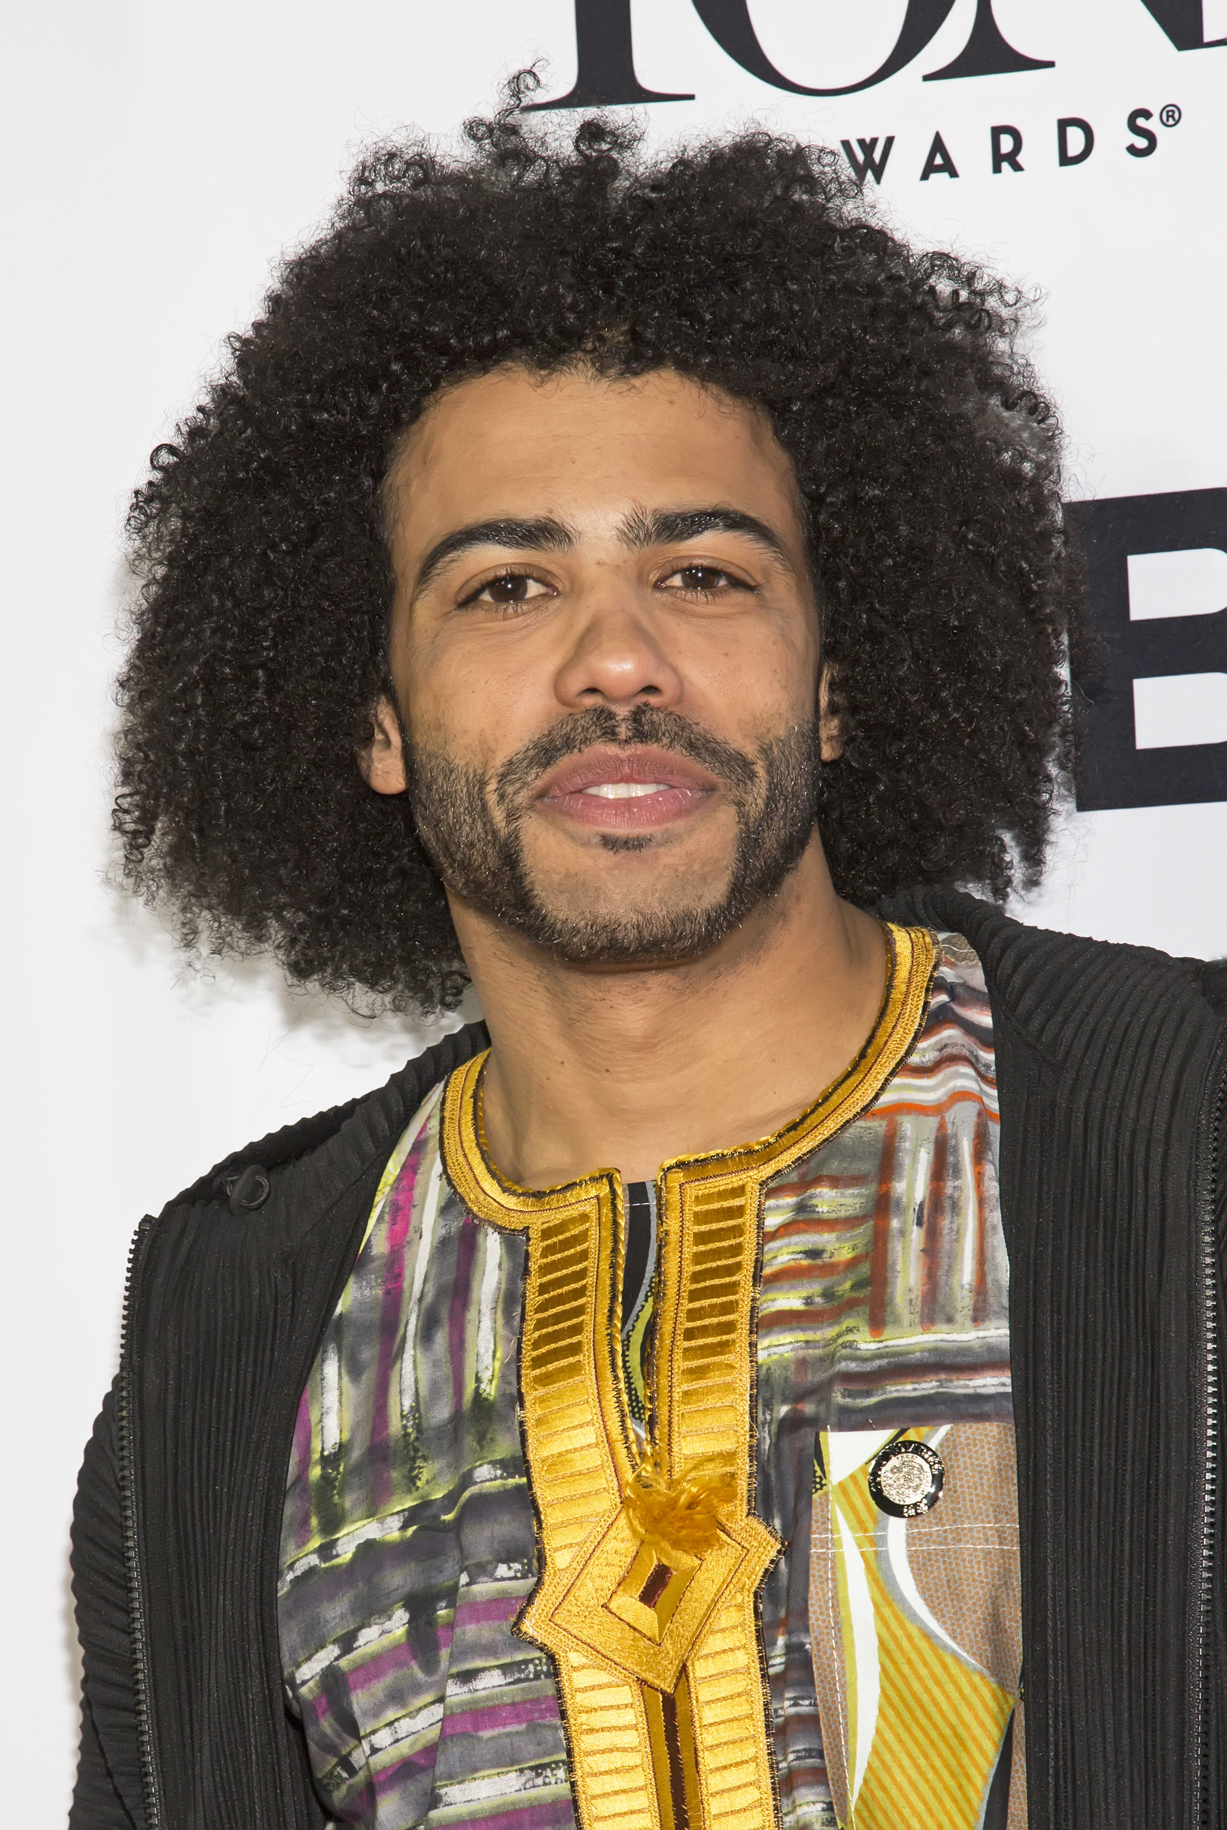 05/04/2016 - Daveed Diggs - 70th Annual Tony Awards - Meet the Nominees Press Reception - Arrivals - Diamond Horseshoe at the Paramount Hotel, 235 West 46th Street - New York City, NY, USA - Keywords: actor, "Hamilton," musical, mid-town Manhattan, Antoinette Perry Awards, nominated artists, Broadway theater nominees, run-up to upcoming Tony Awards, entertainment, honors, lapel pins, prestigious, honorific Orientation: Portrait Face Count: 1 - False - Photo Credit: Laurence Agron / PRPhotos.com - Contact (1-866-551-7827) - Portrait Face Count: 1